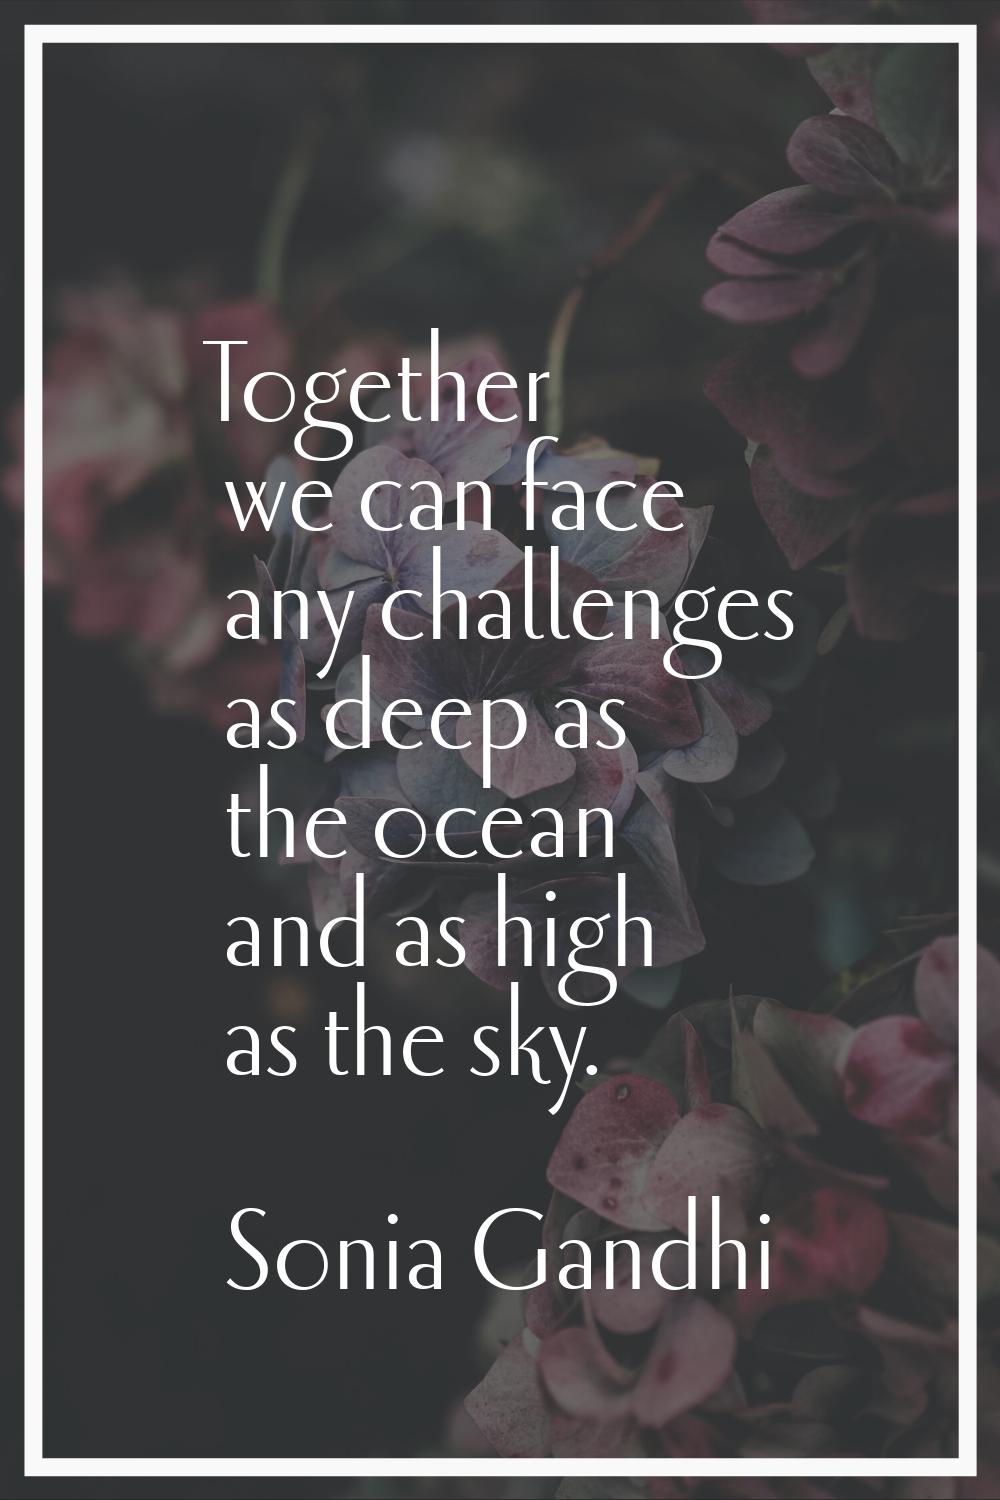 Together we can face any challenges as deep as the ocean and as high as the sky.